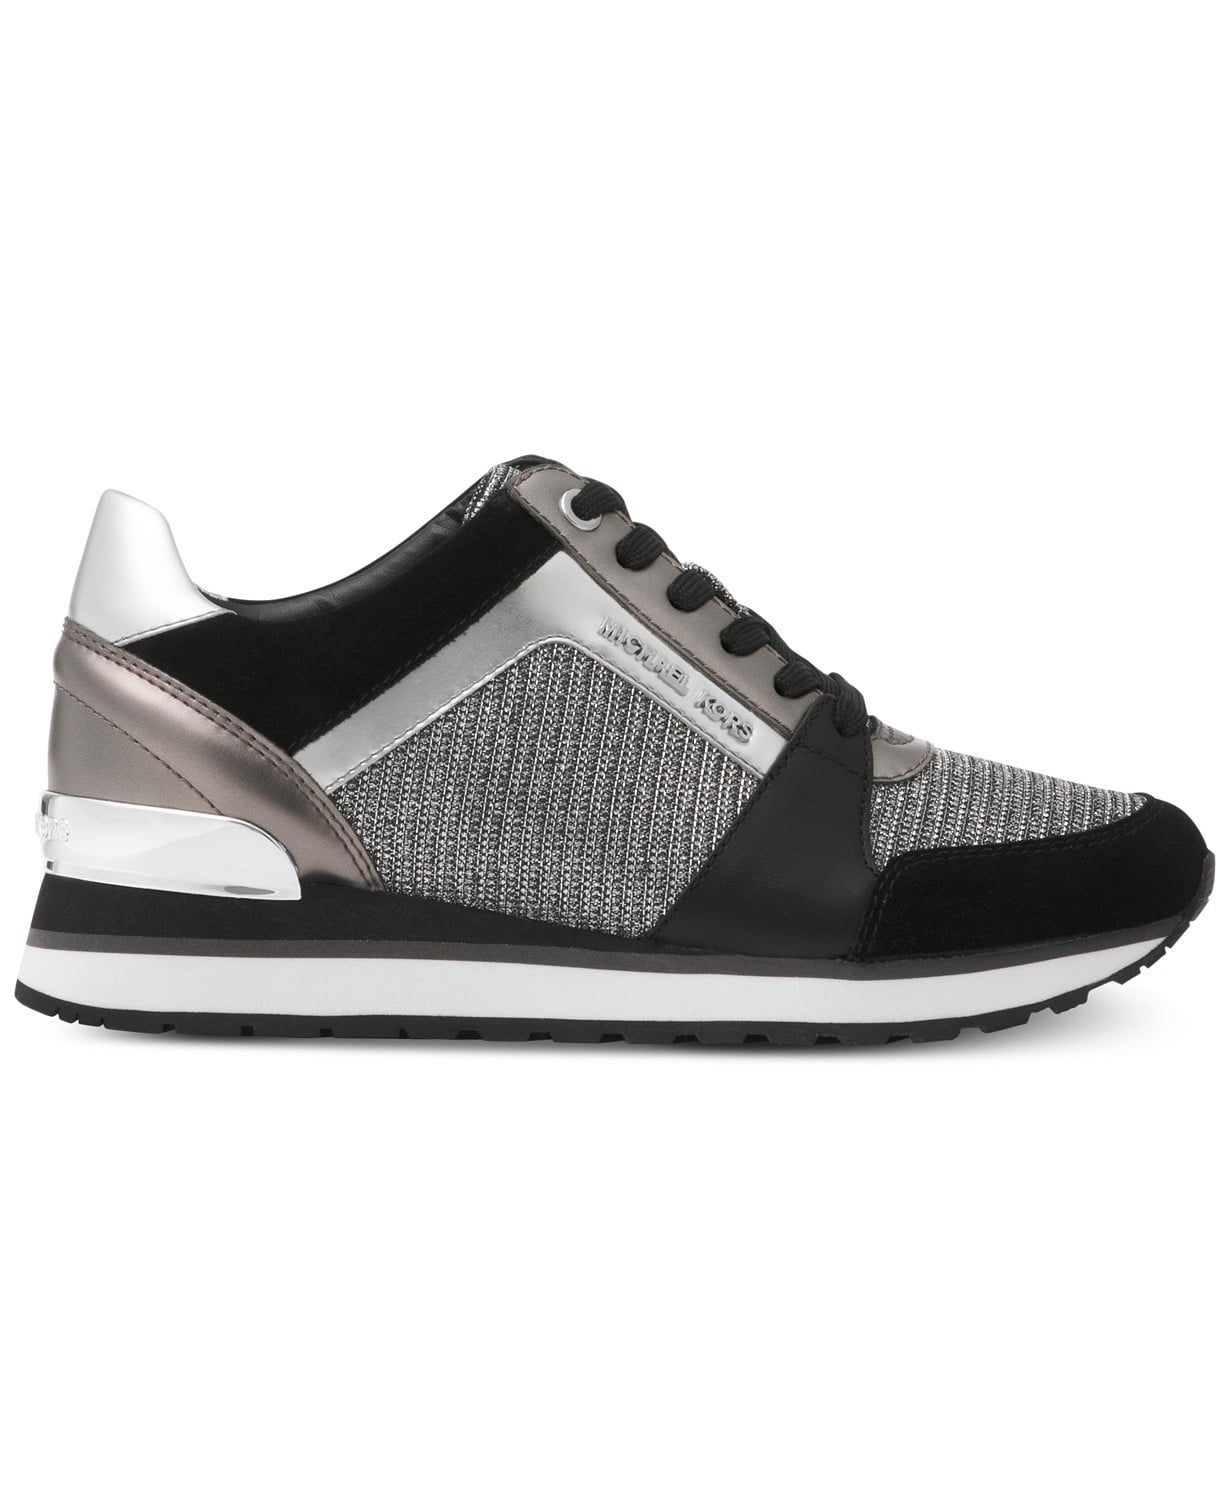 michael kors black and silver shoes